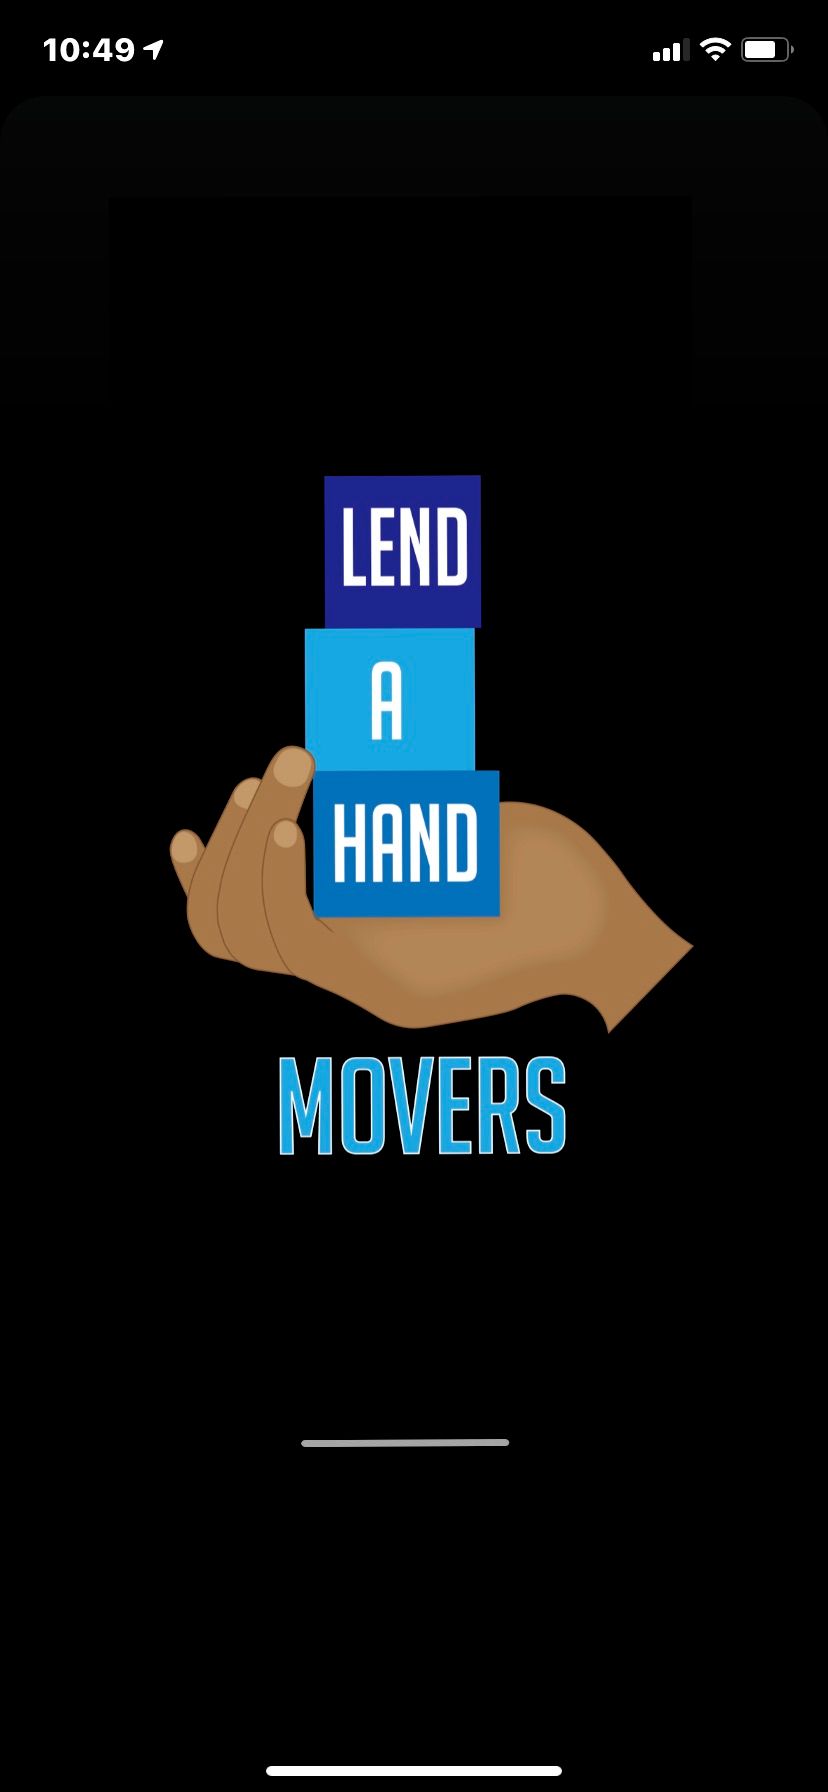 Lend A Hand Movers